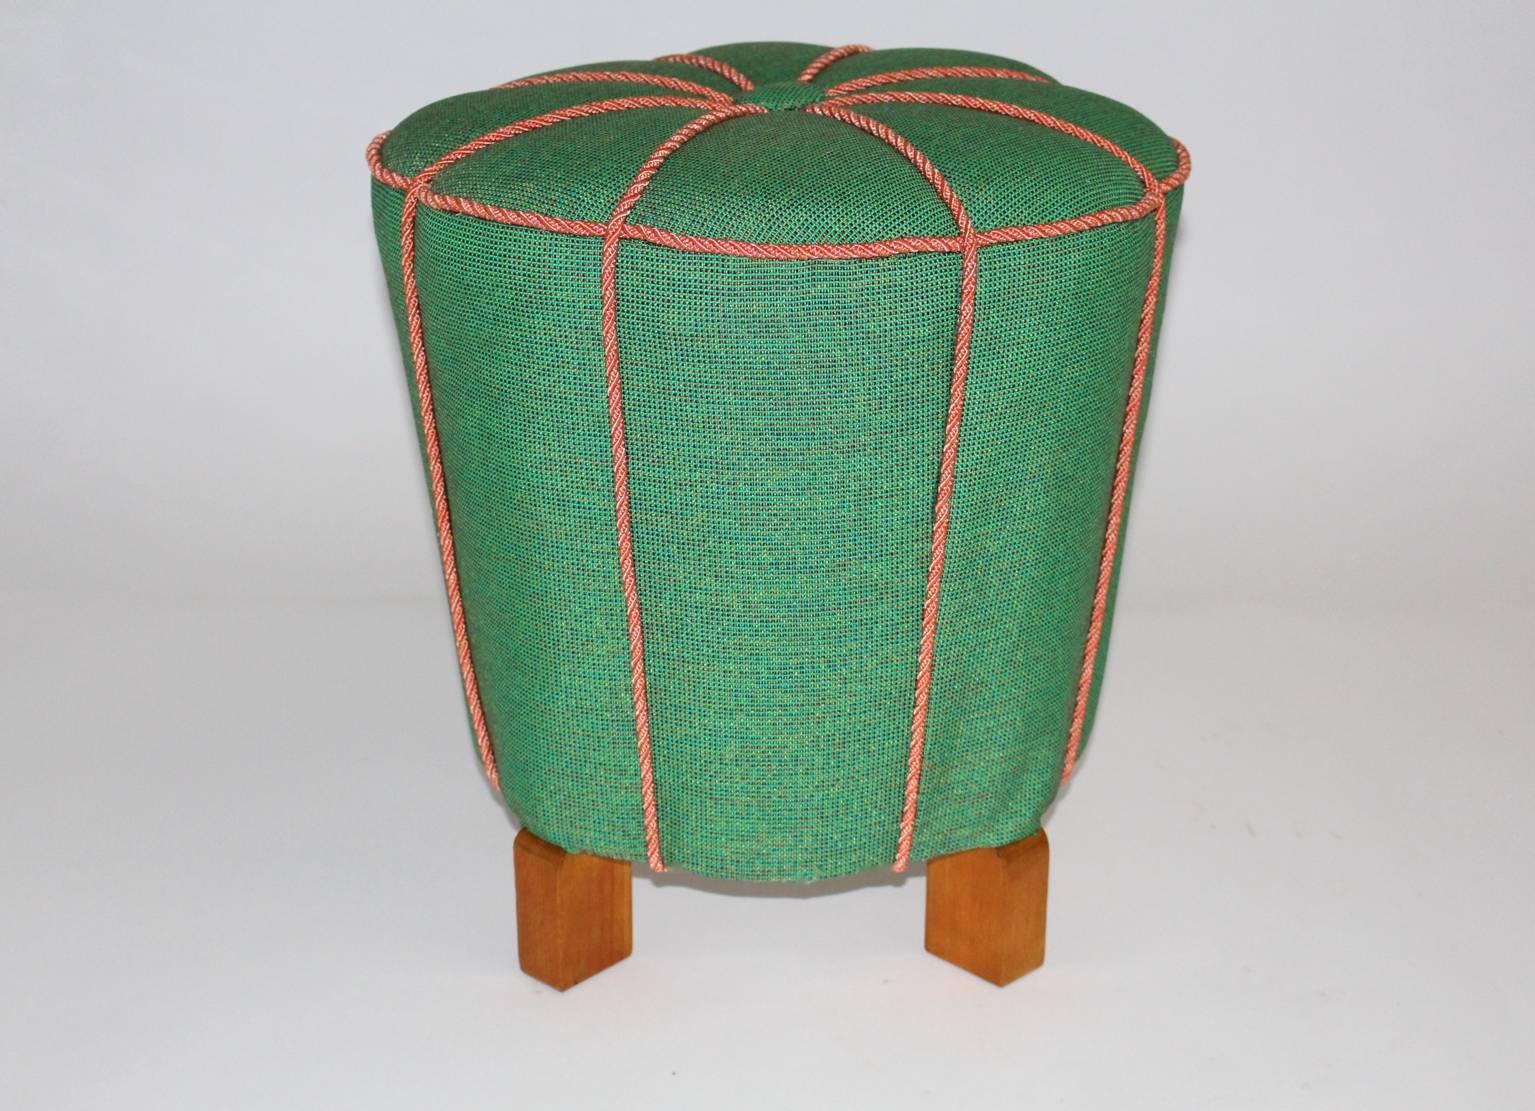 This presented elegant Stool or Tabouret features a very charming curved shape.
The original upholstery is newly covered with a luxurious green textile fabric furthermore salmon-pink cords decorates the surface.
In the middle of this Stool sits a